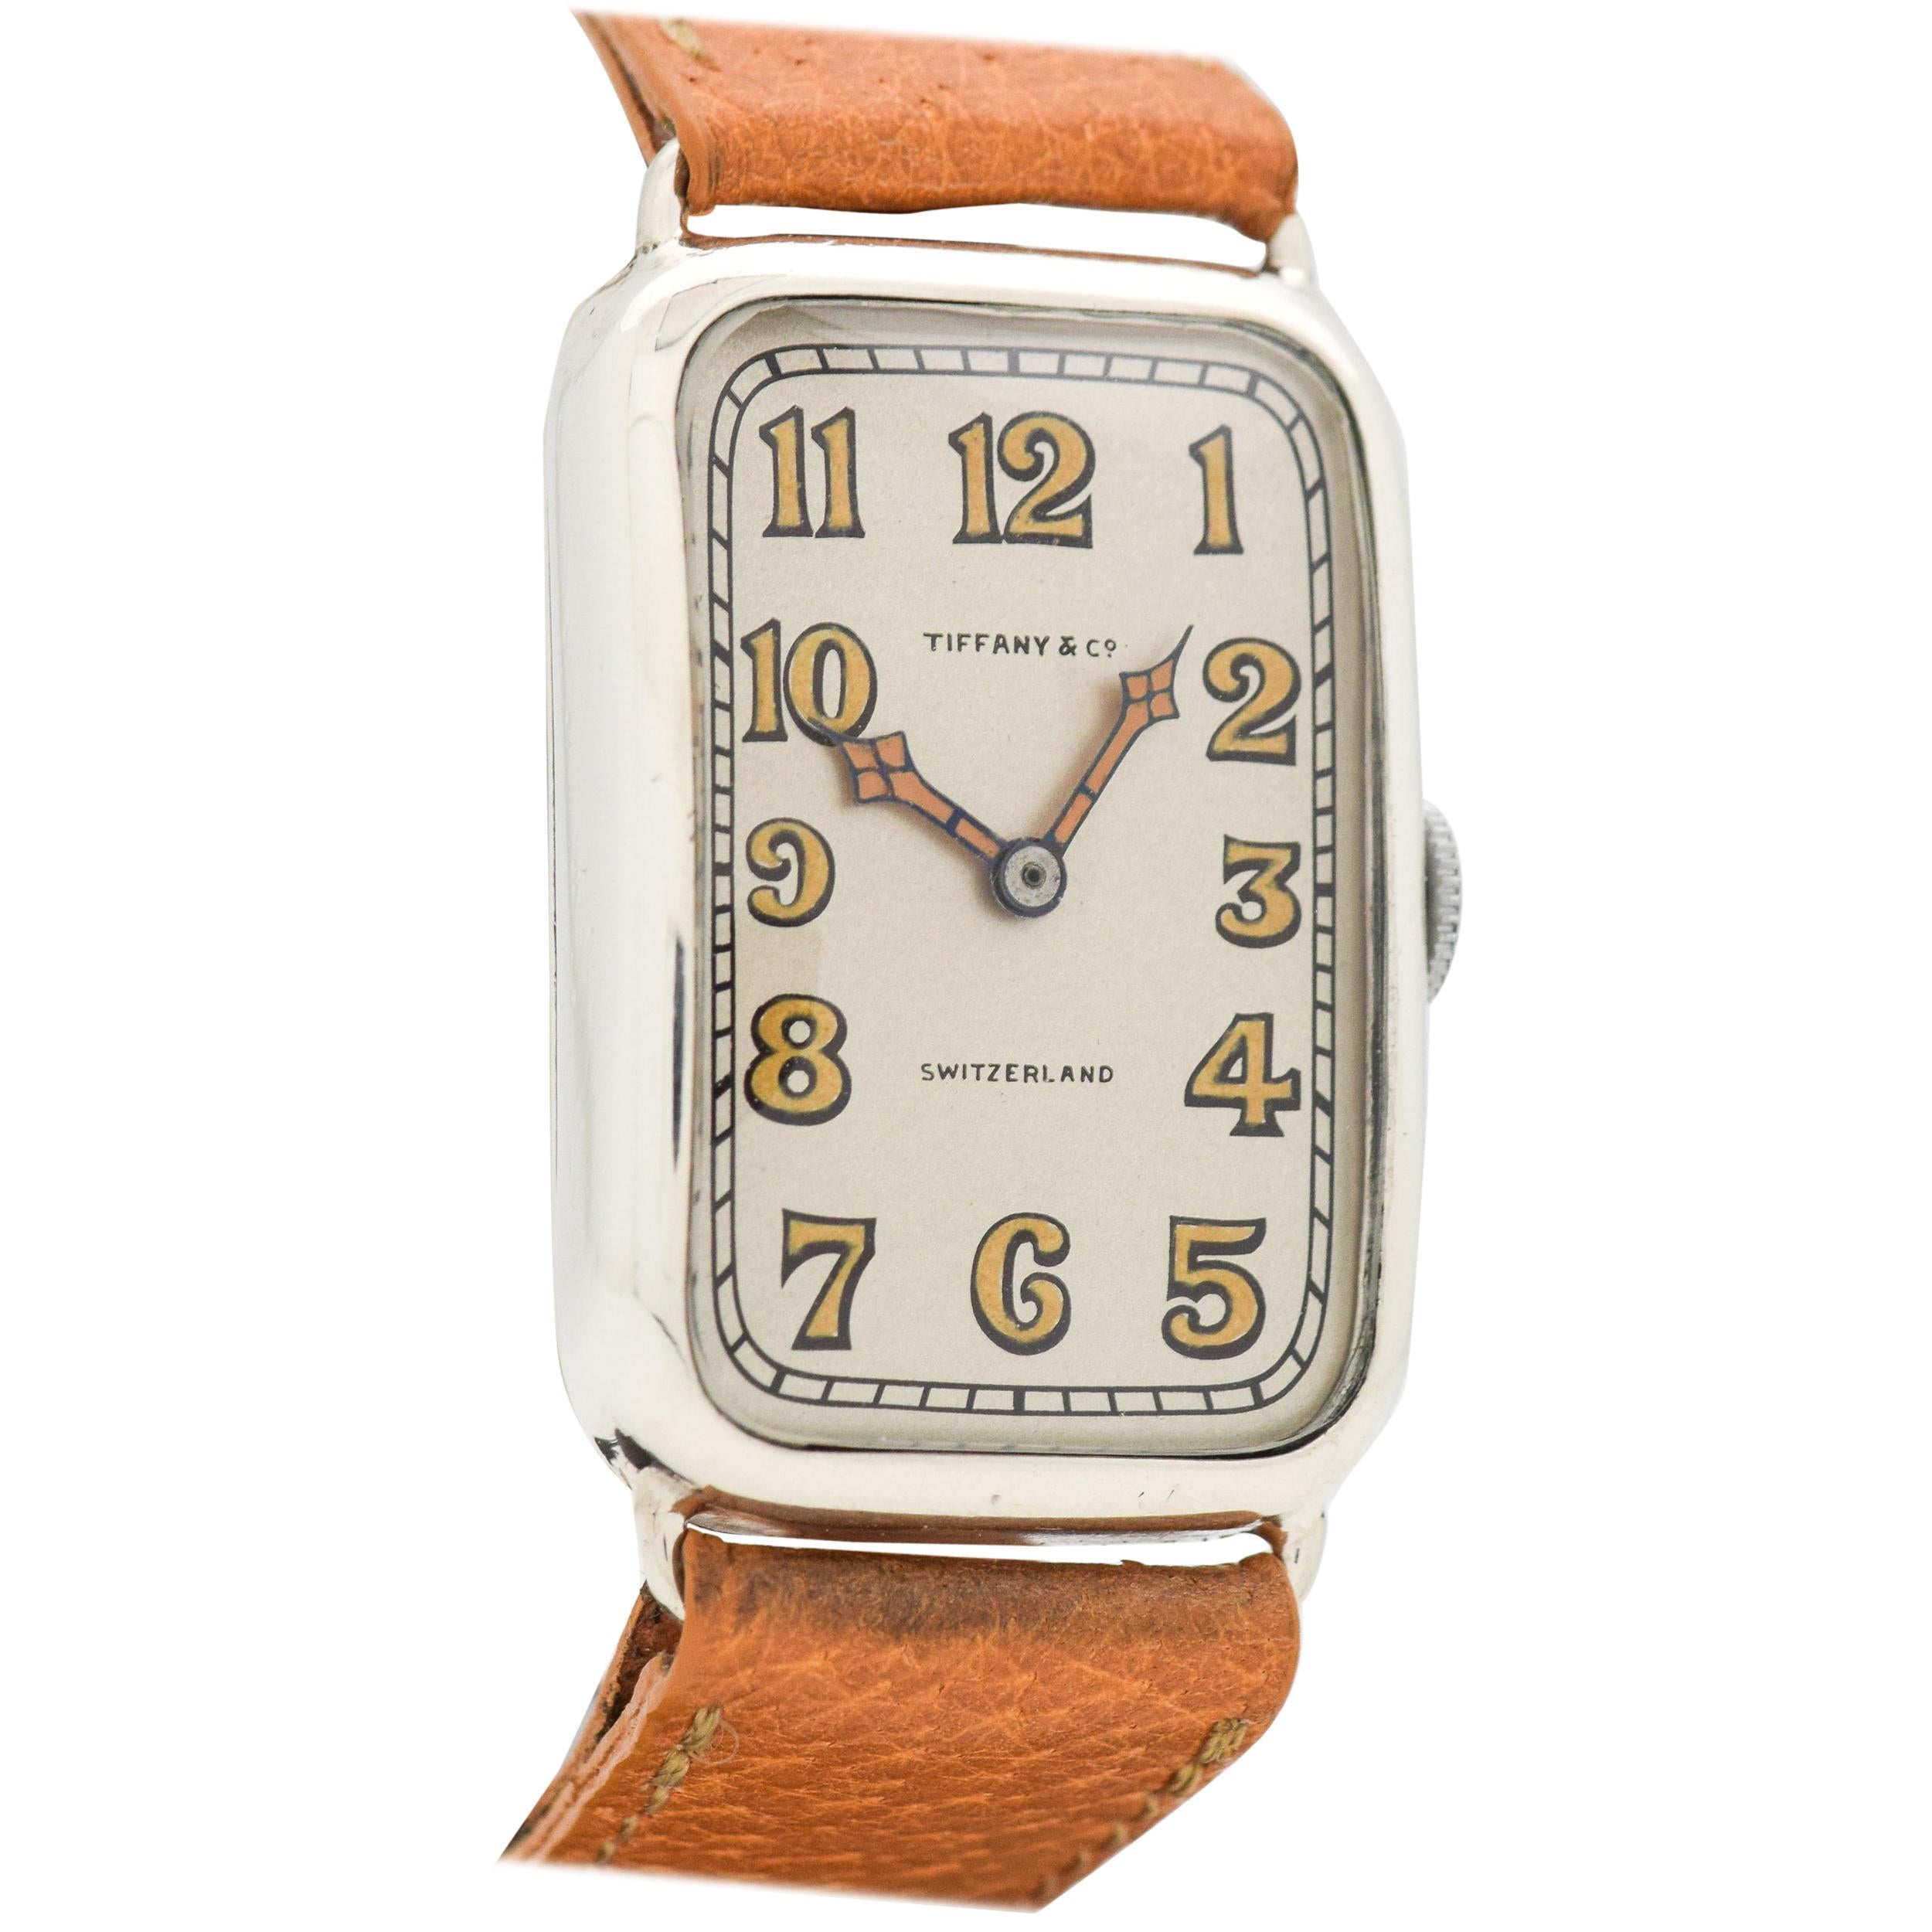 Vintage Tiffany & Co. Rectangular-Shaped Sterling Silver Watch, 1924